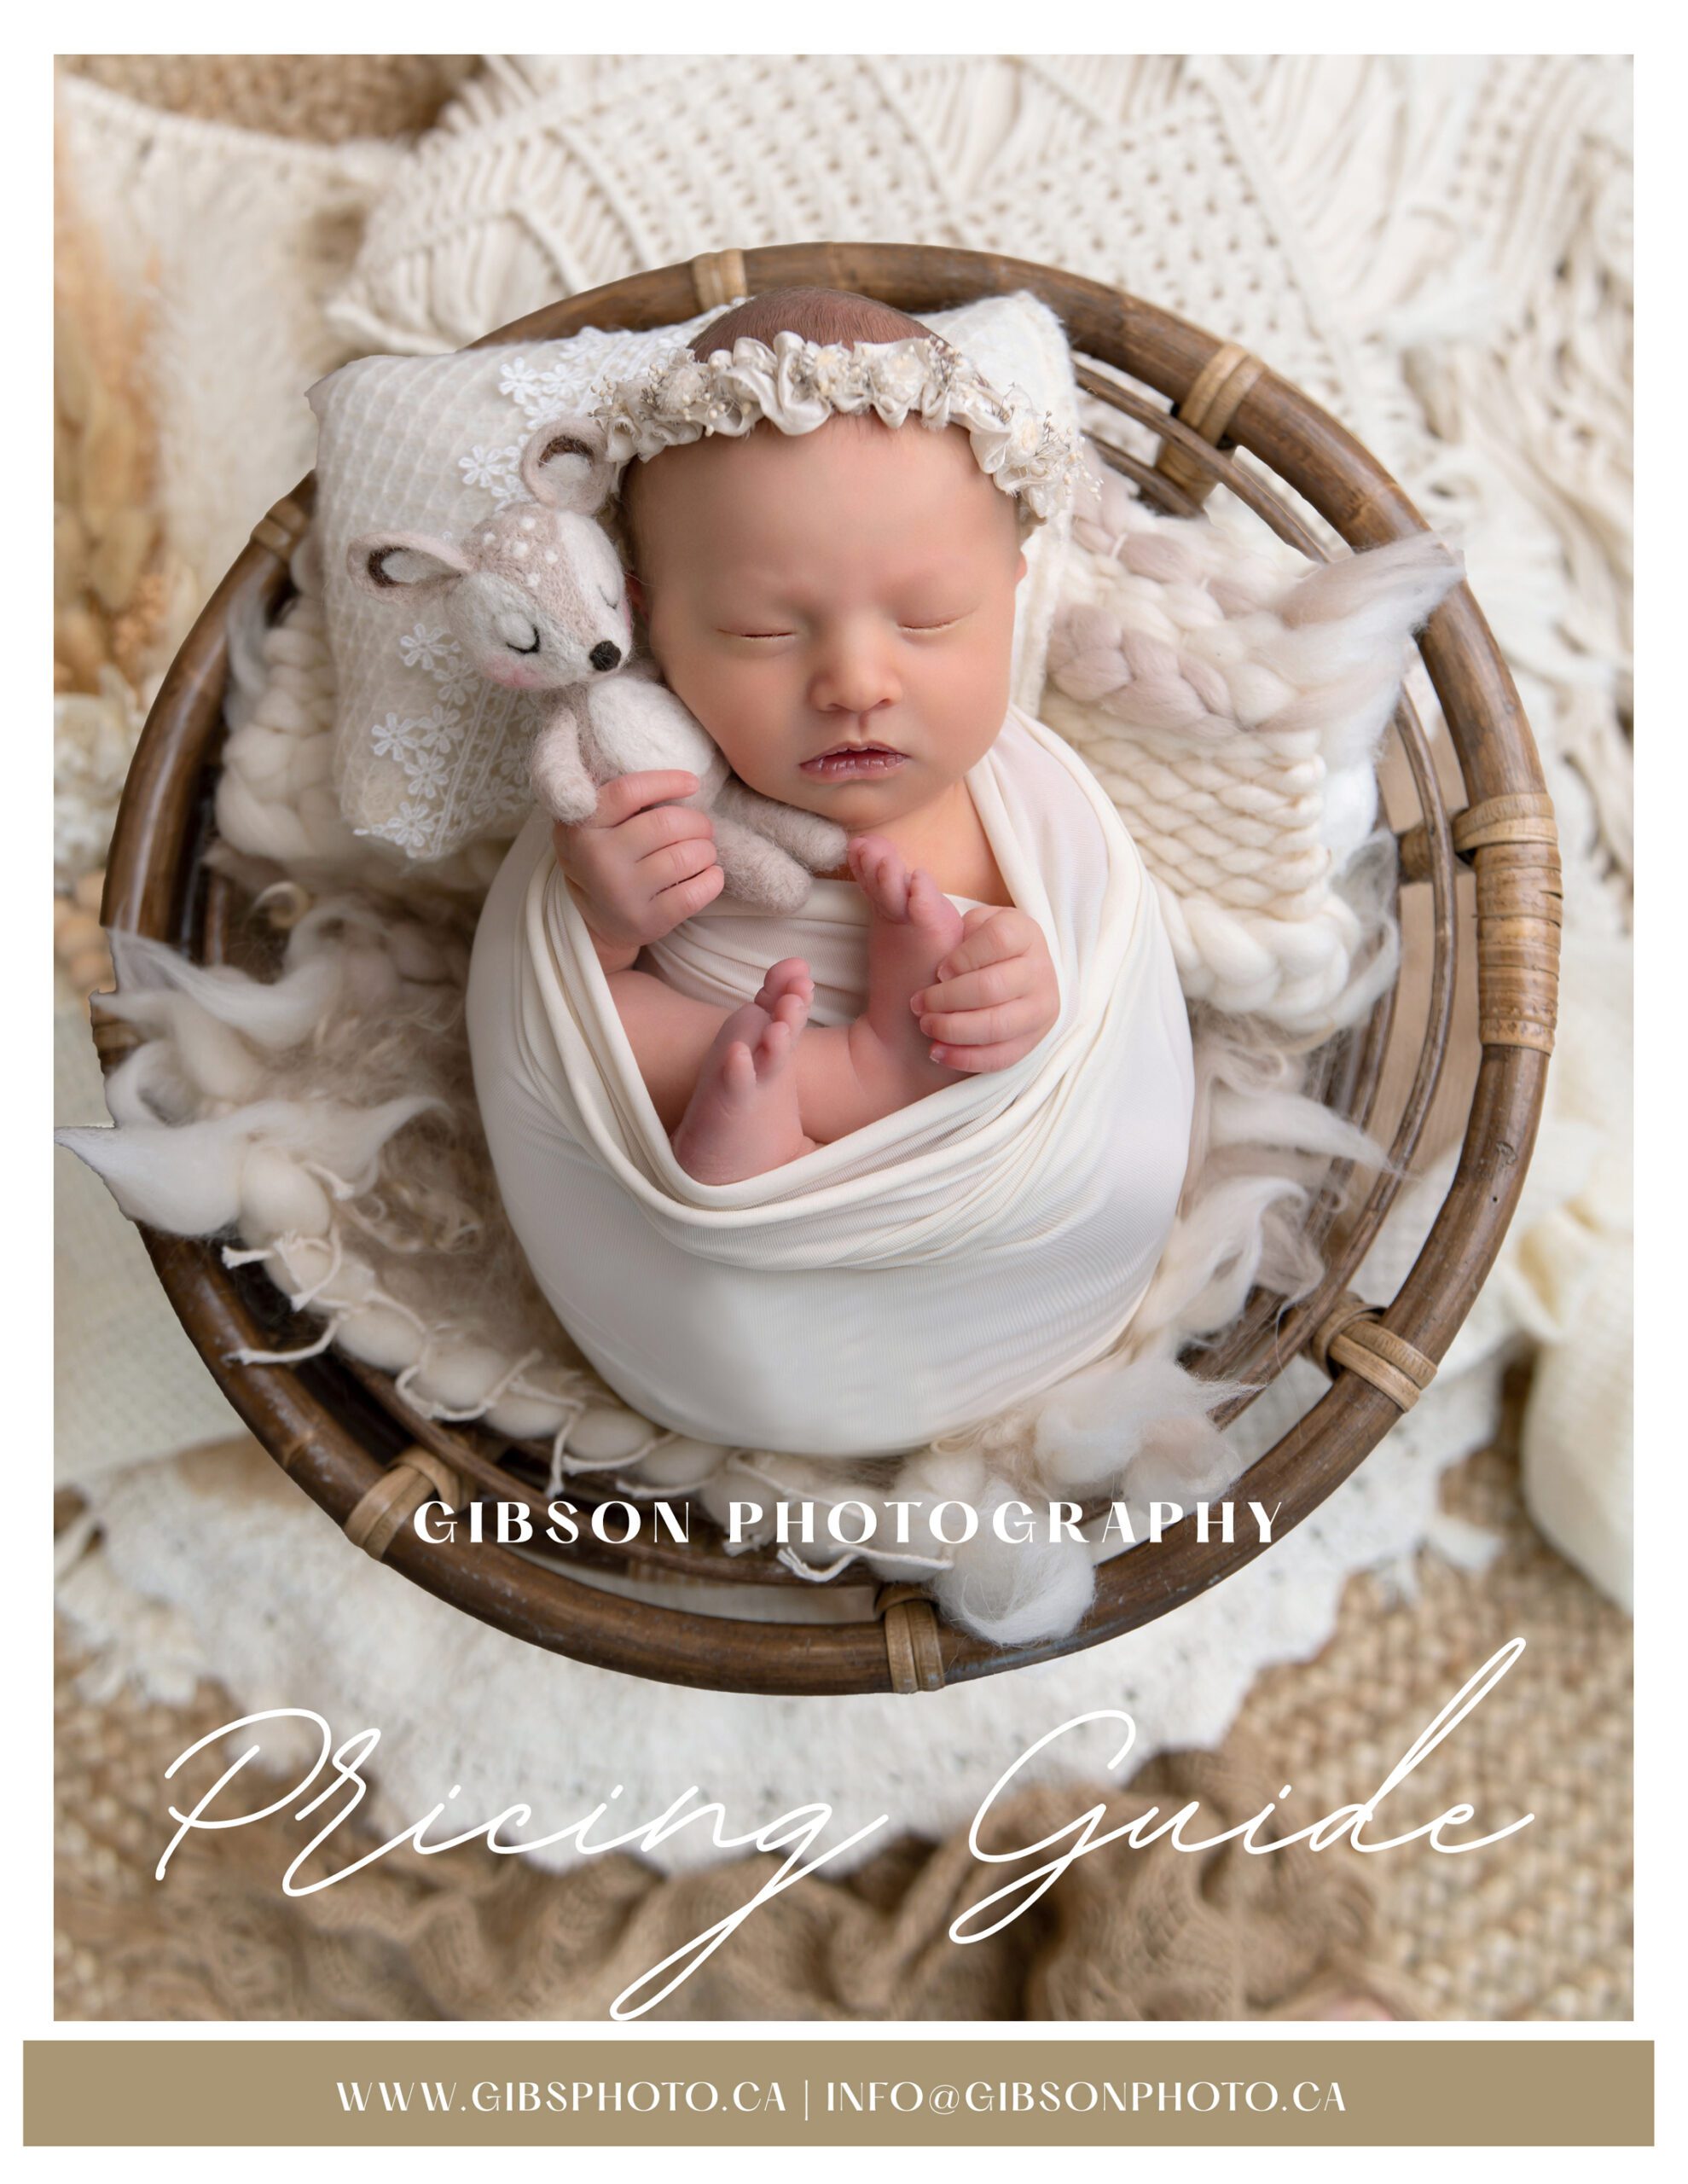 Toronto Newborn Photographer front page of Investment guide with newborn baby on the cover.